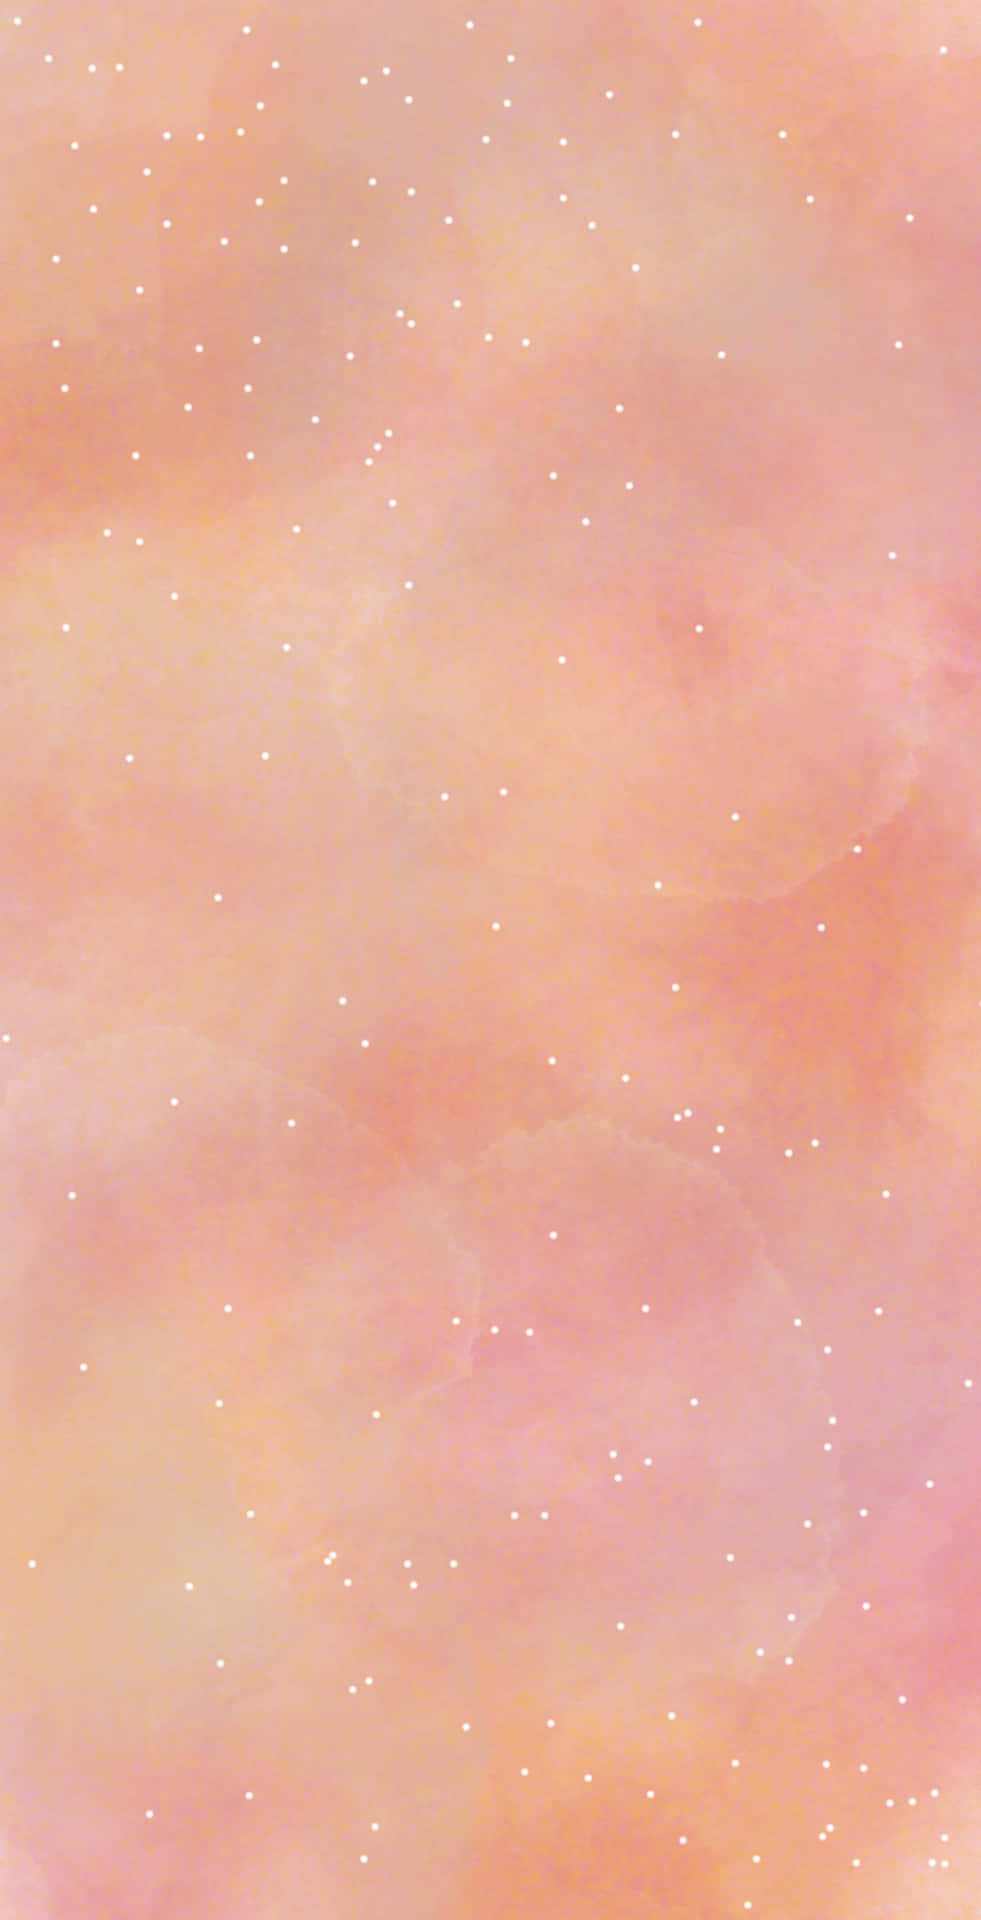 A Watercolor Background With A Pink And Yellow Color Wallpaper